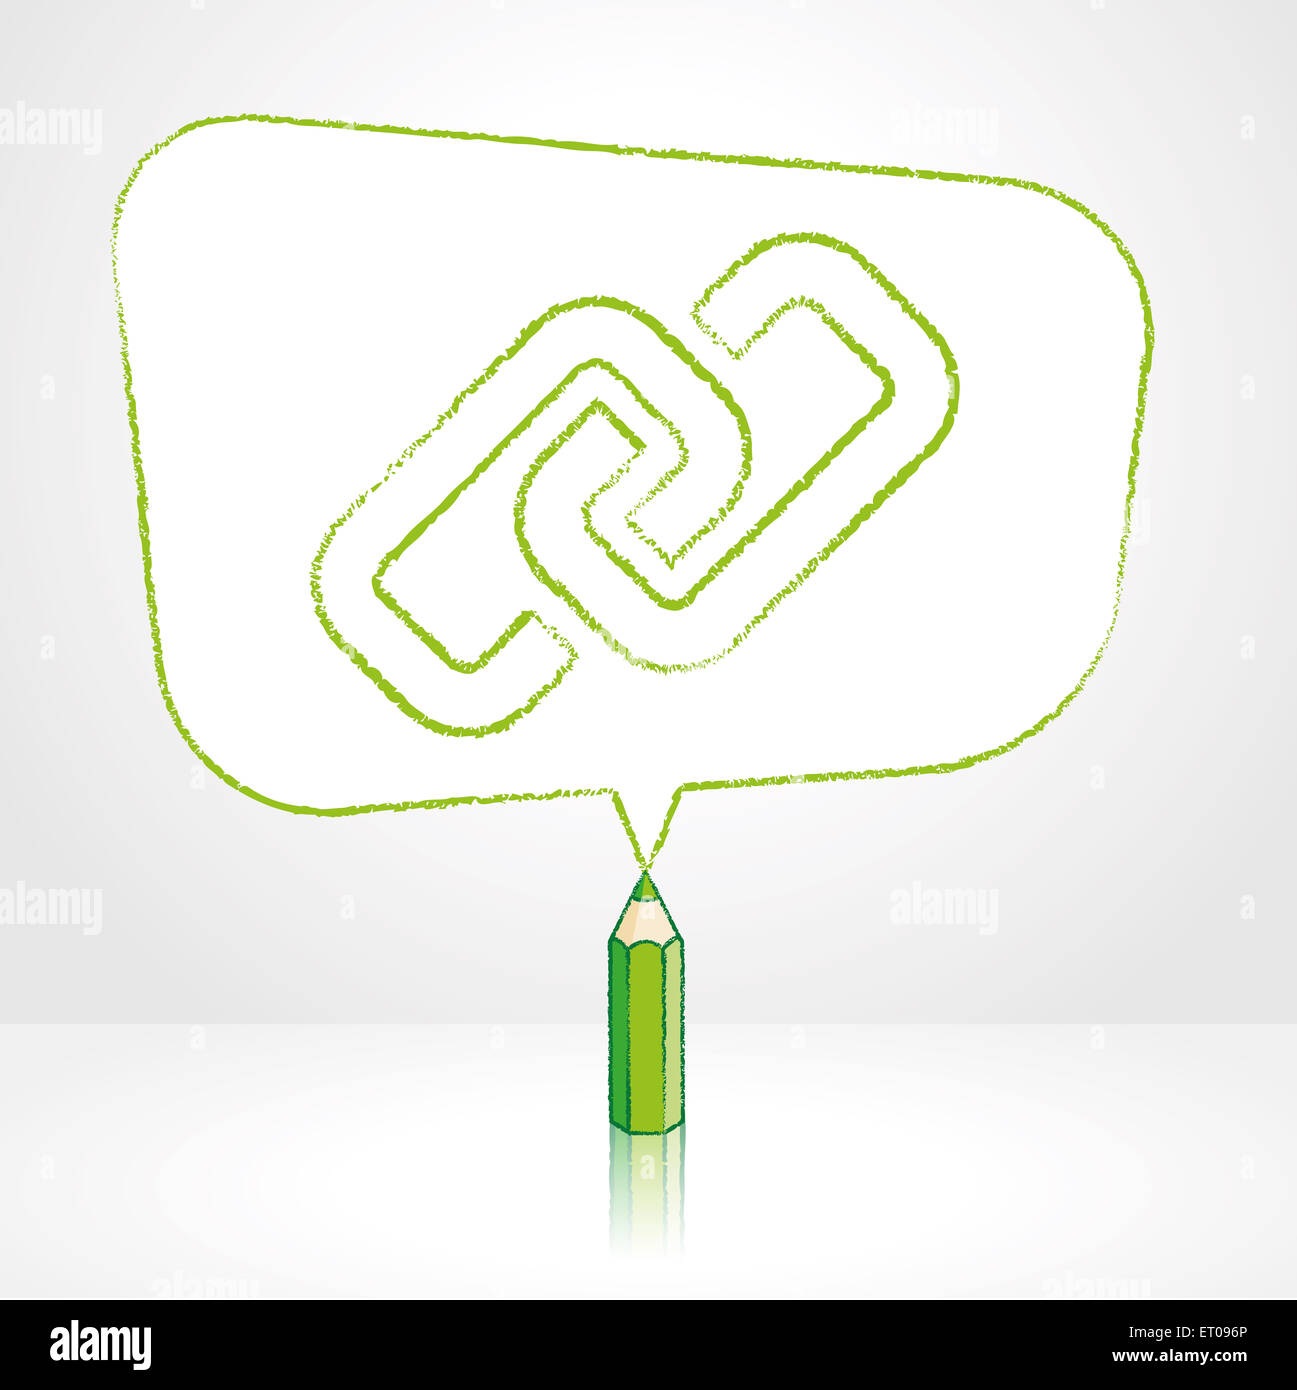 Green Pencil with Reflection Drawing Digital Media Link Icon in Rounded Skewed Rectangular Shaped Speech Bubble on Pale Backgrou Stock Photo